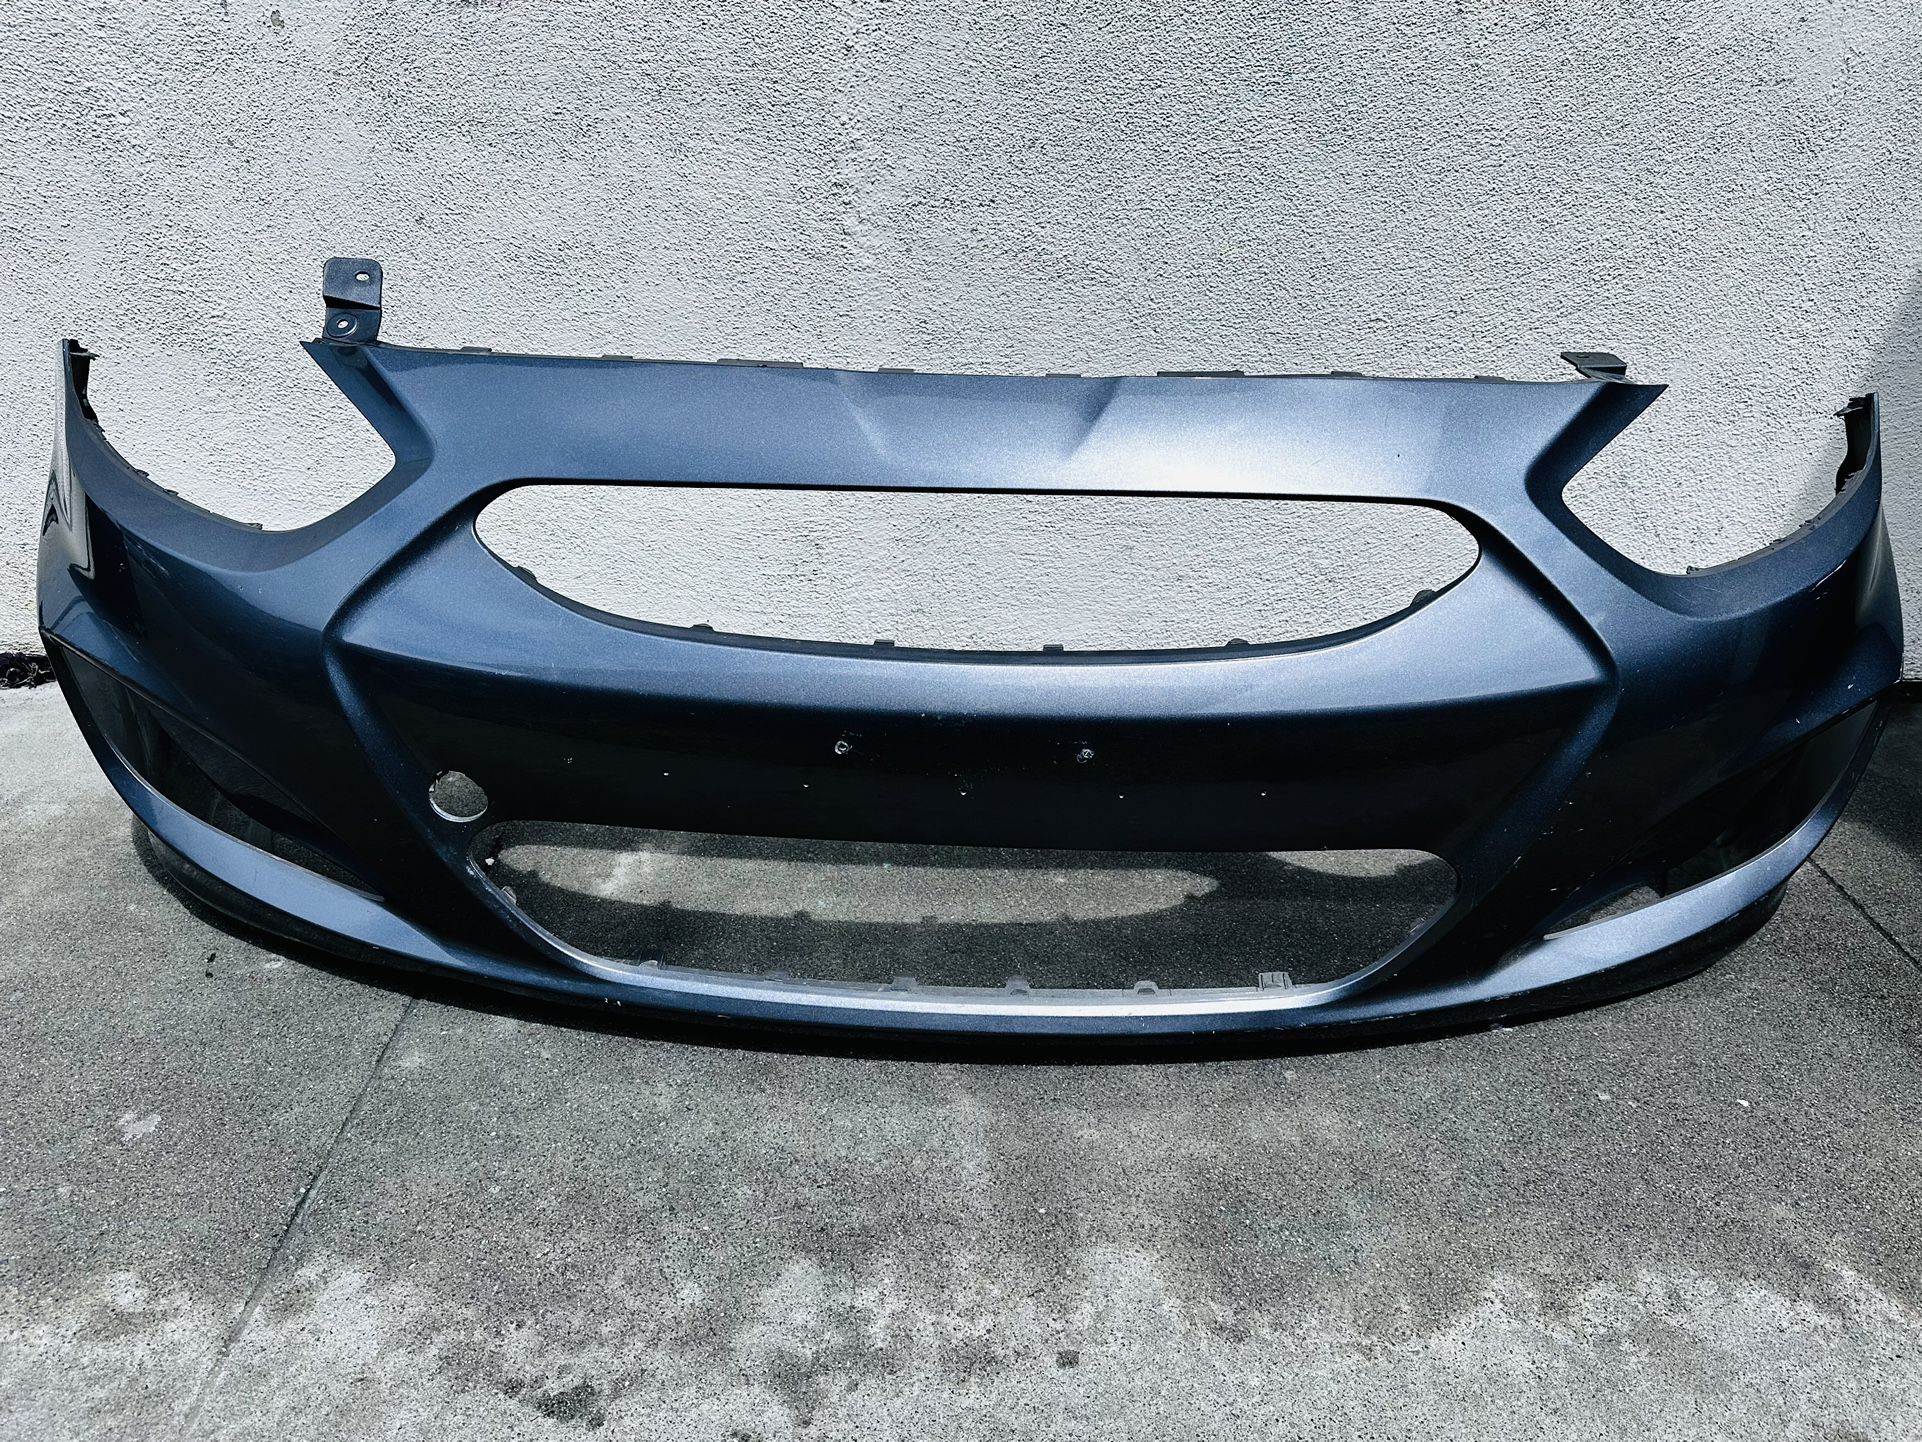 2012 - 2017 HYUNDAI ACCENT GS/GLS/SE/ SPORT FRONT BUMPER COVER EOM 86511- 1R010 SOLD AS IS.